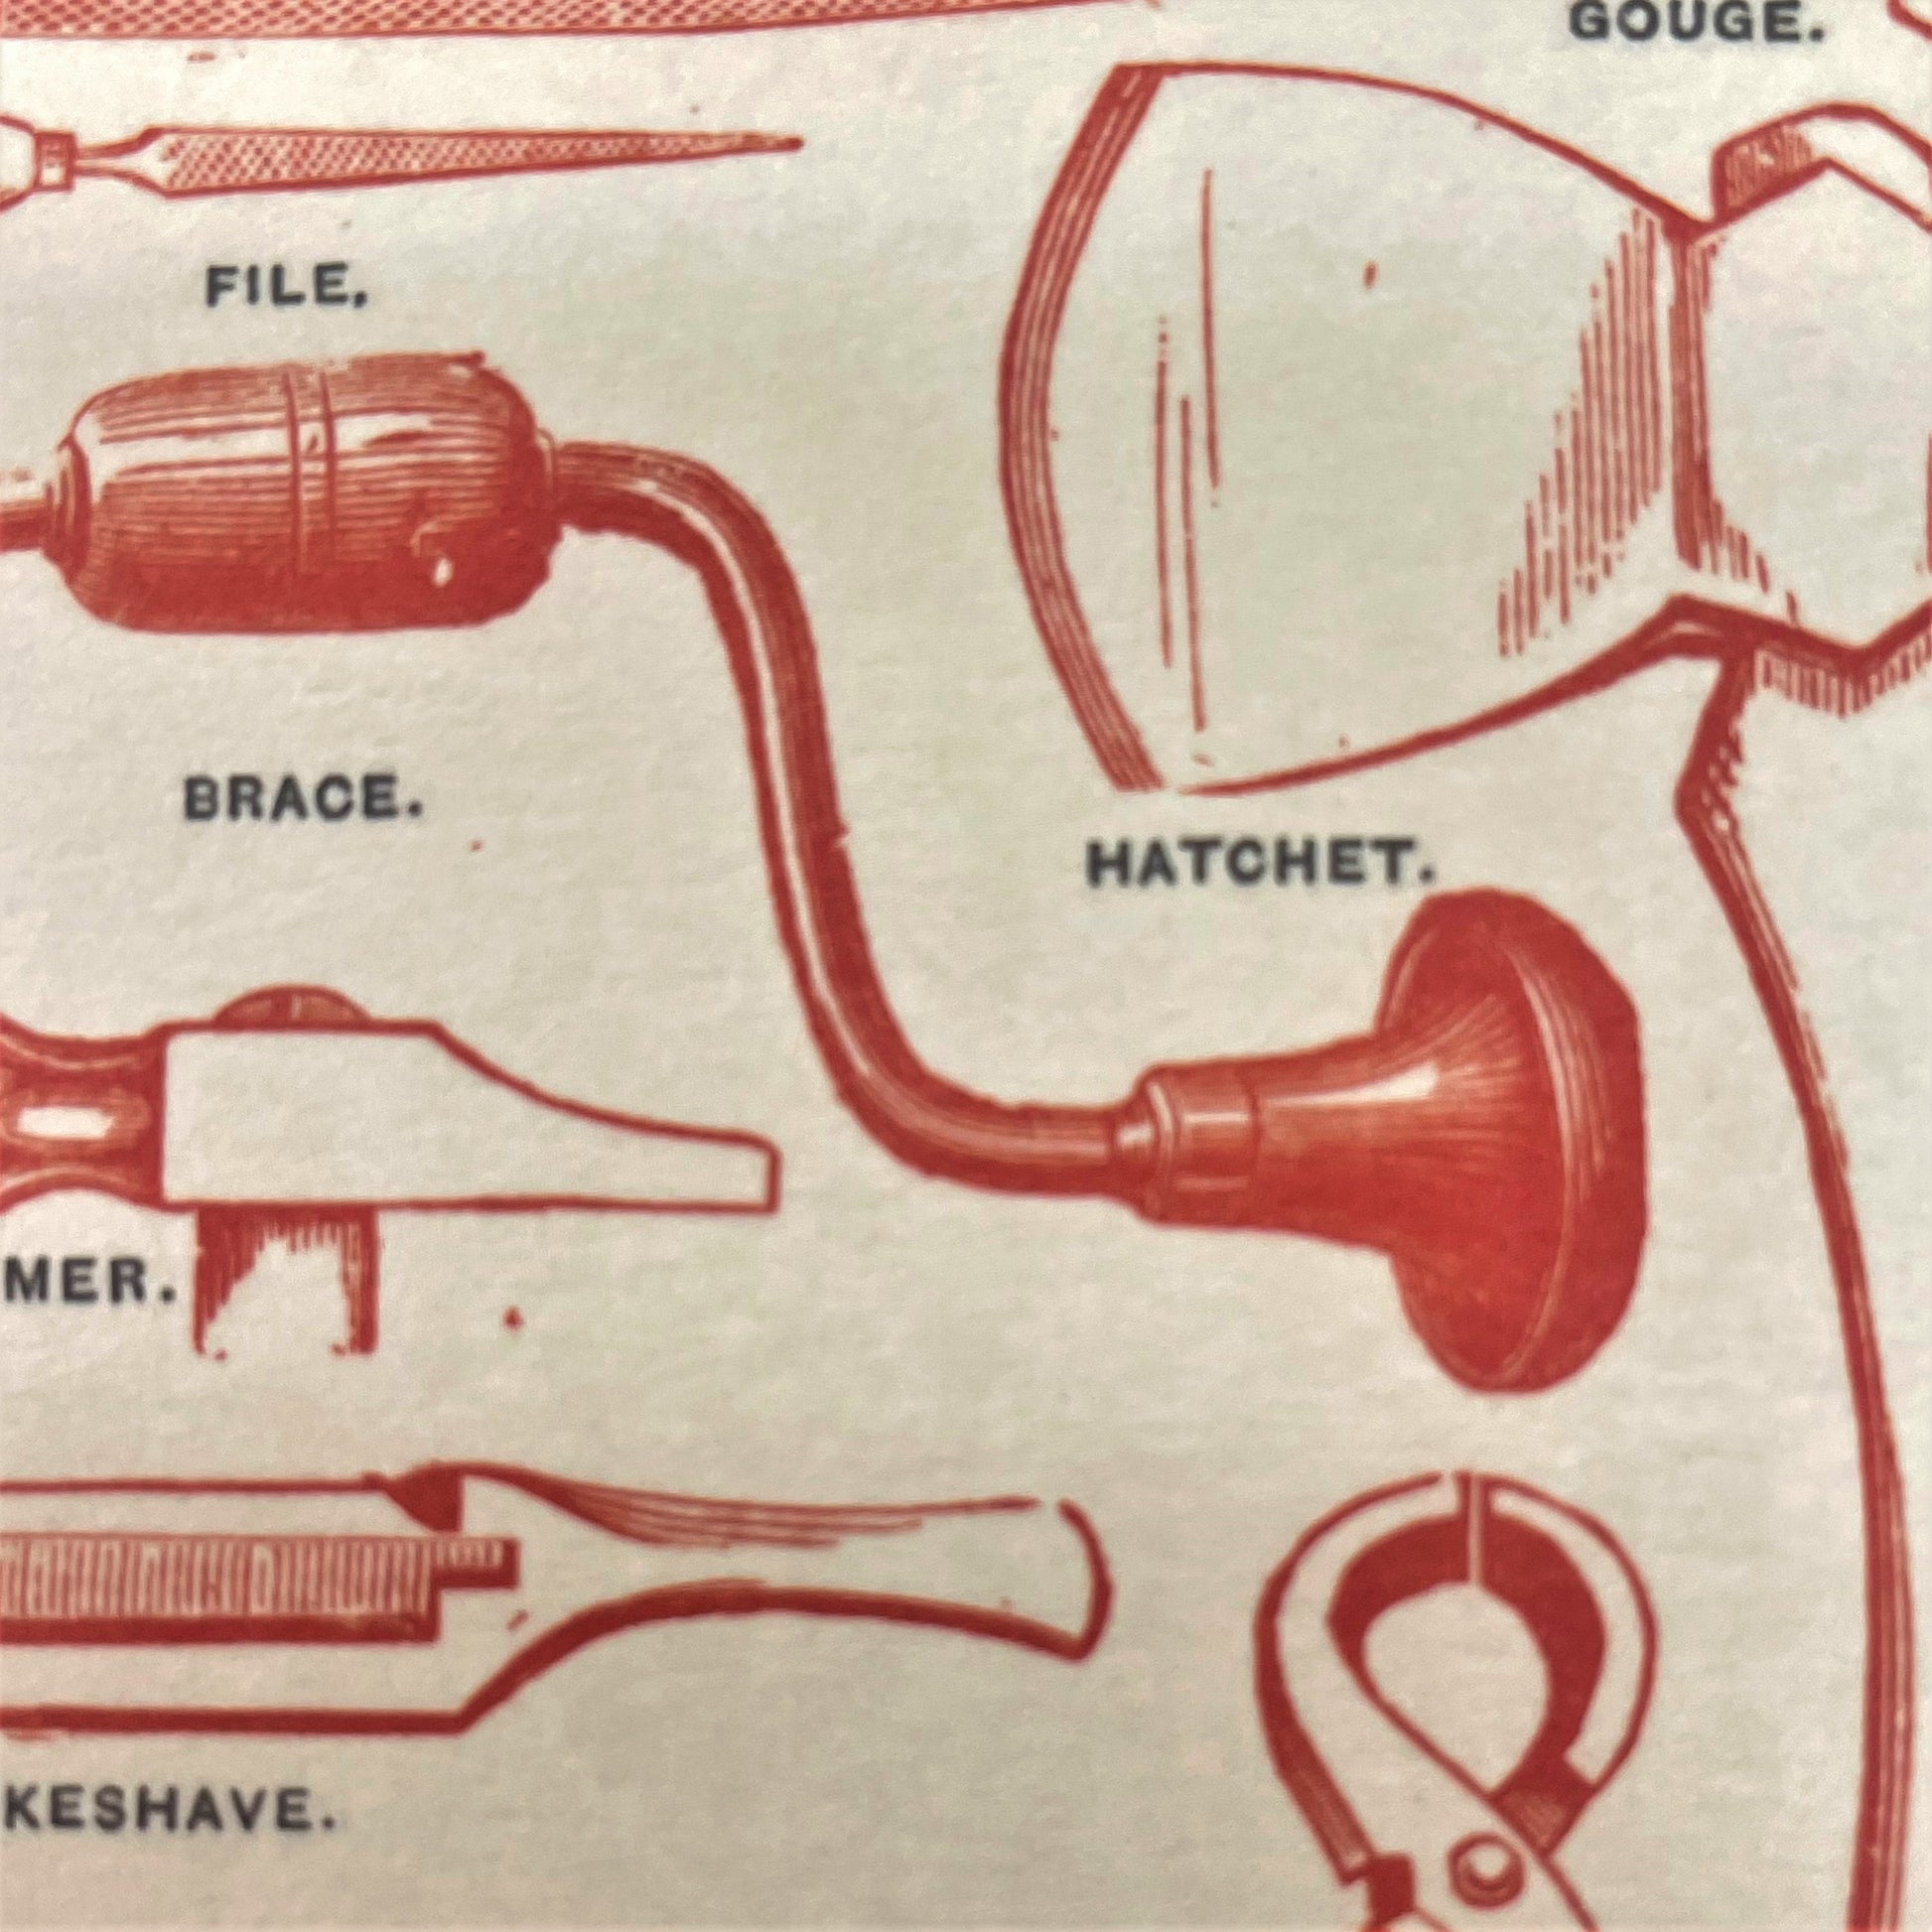 greetings card with drawing of different woodworker's tools, close-up